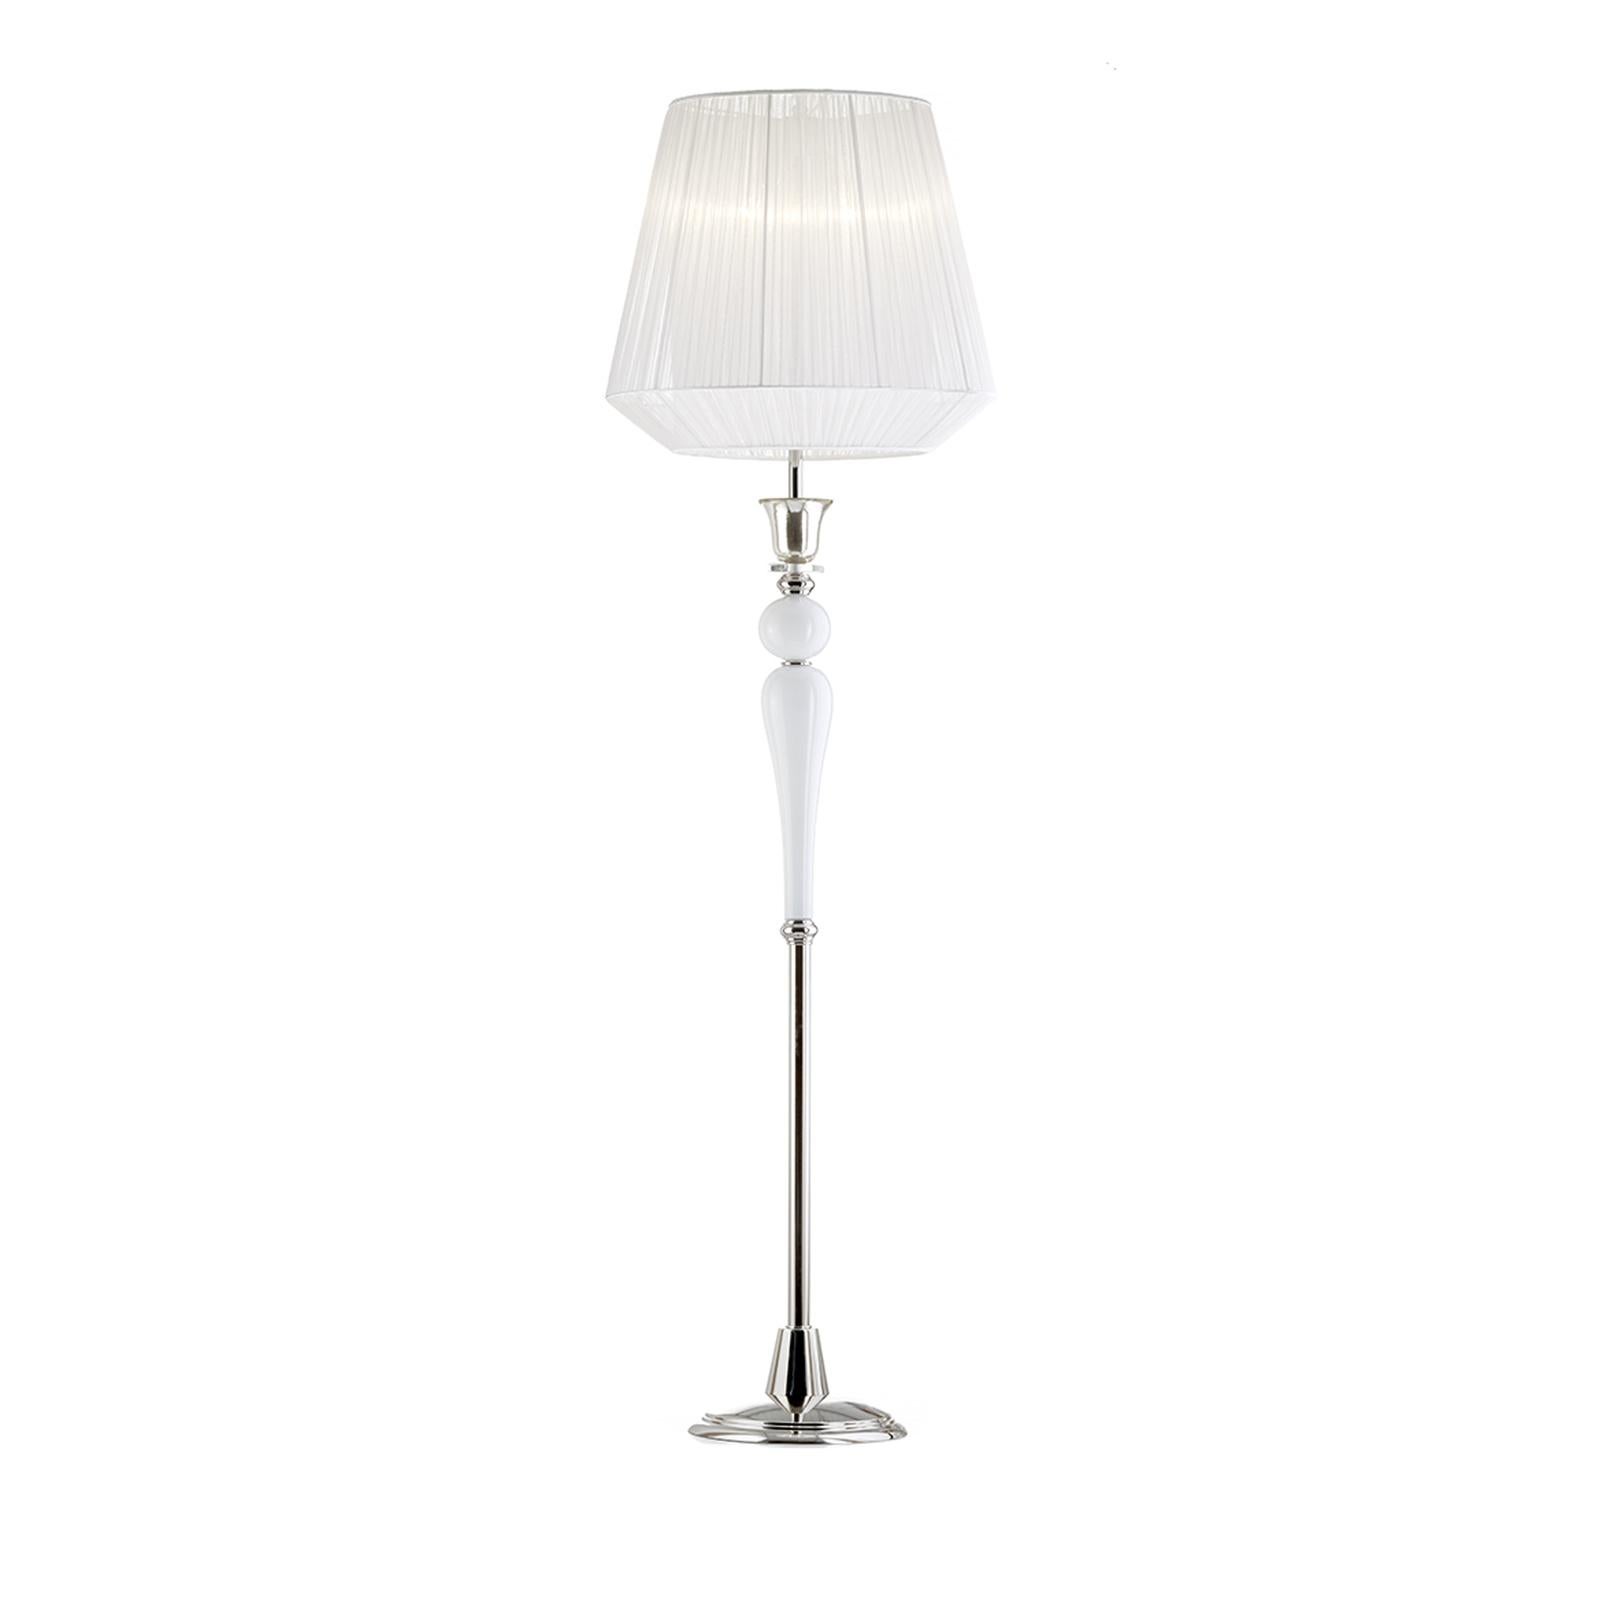 Elegant and charming, this floor lamp effortlessly blends tradition with modern allure. The base and vertical structure display antique Venetian glass elements with silver mirrored finish mixed with metal parts with a polished nickel finish. The two